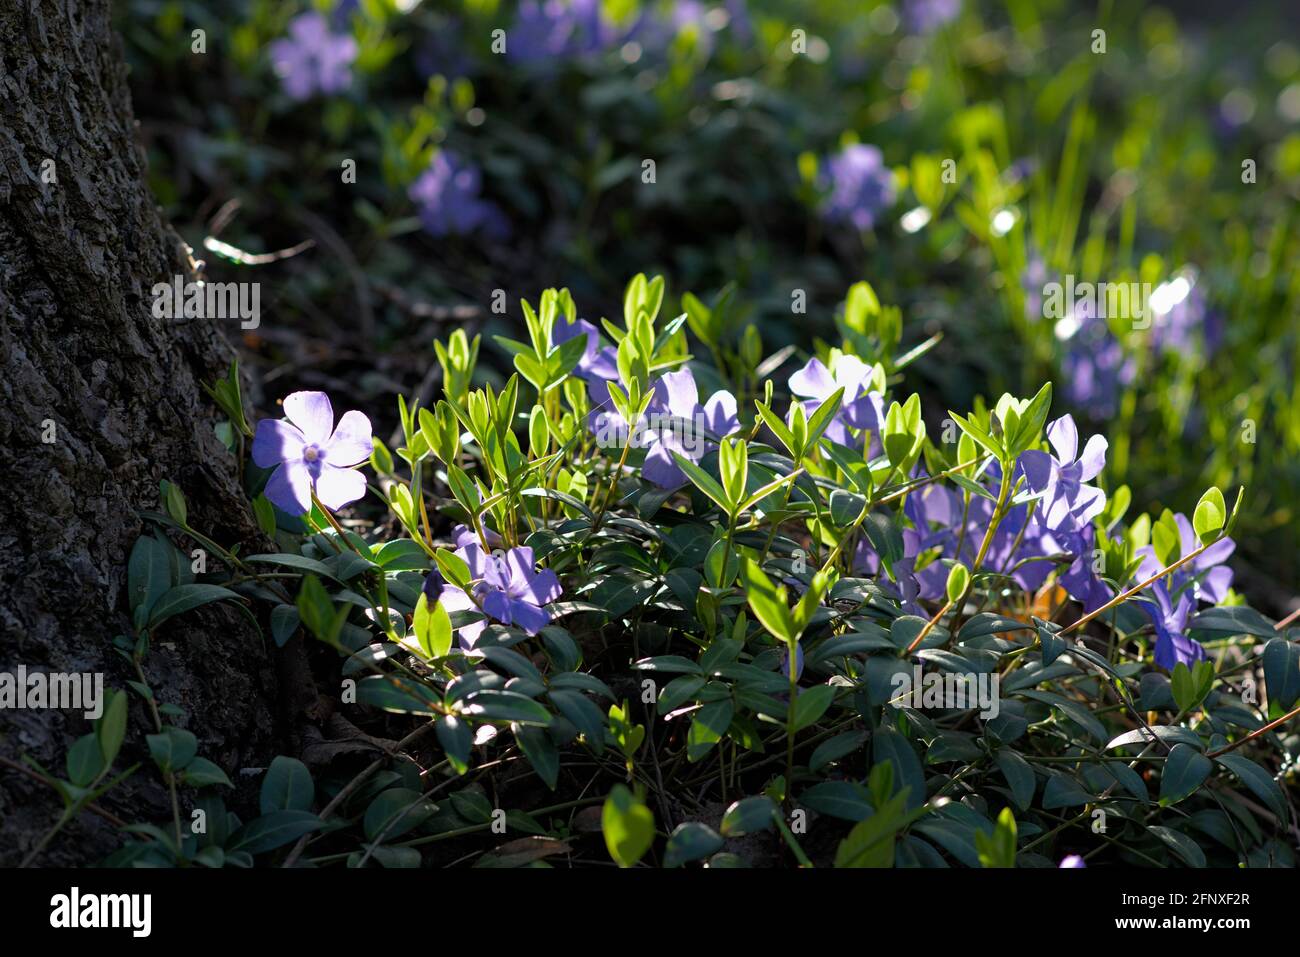 Periwinkle (Vinca minor) with lovely light blue flowers basking in the late afternoon sunshine at the base of a tree in Ottawa, Ontario, Canada. Stock Photo